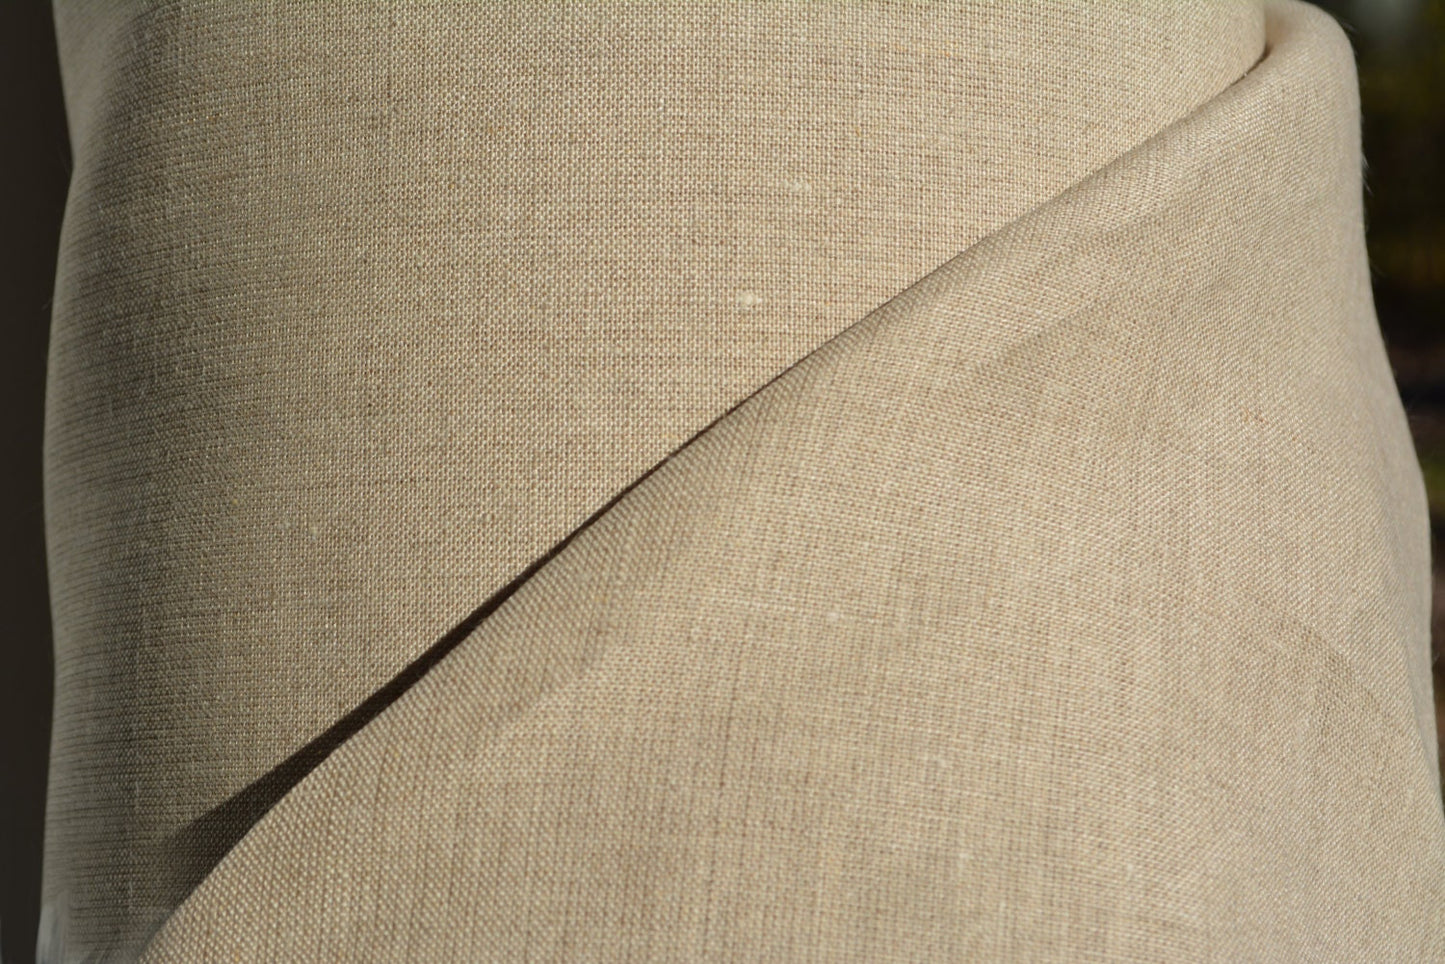 Rovagnati LINO Extra 40 - 100% linen canvas INTERFACING / INTERLINING - finest available - Made in Italy